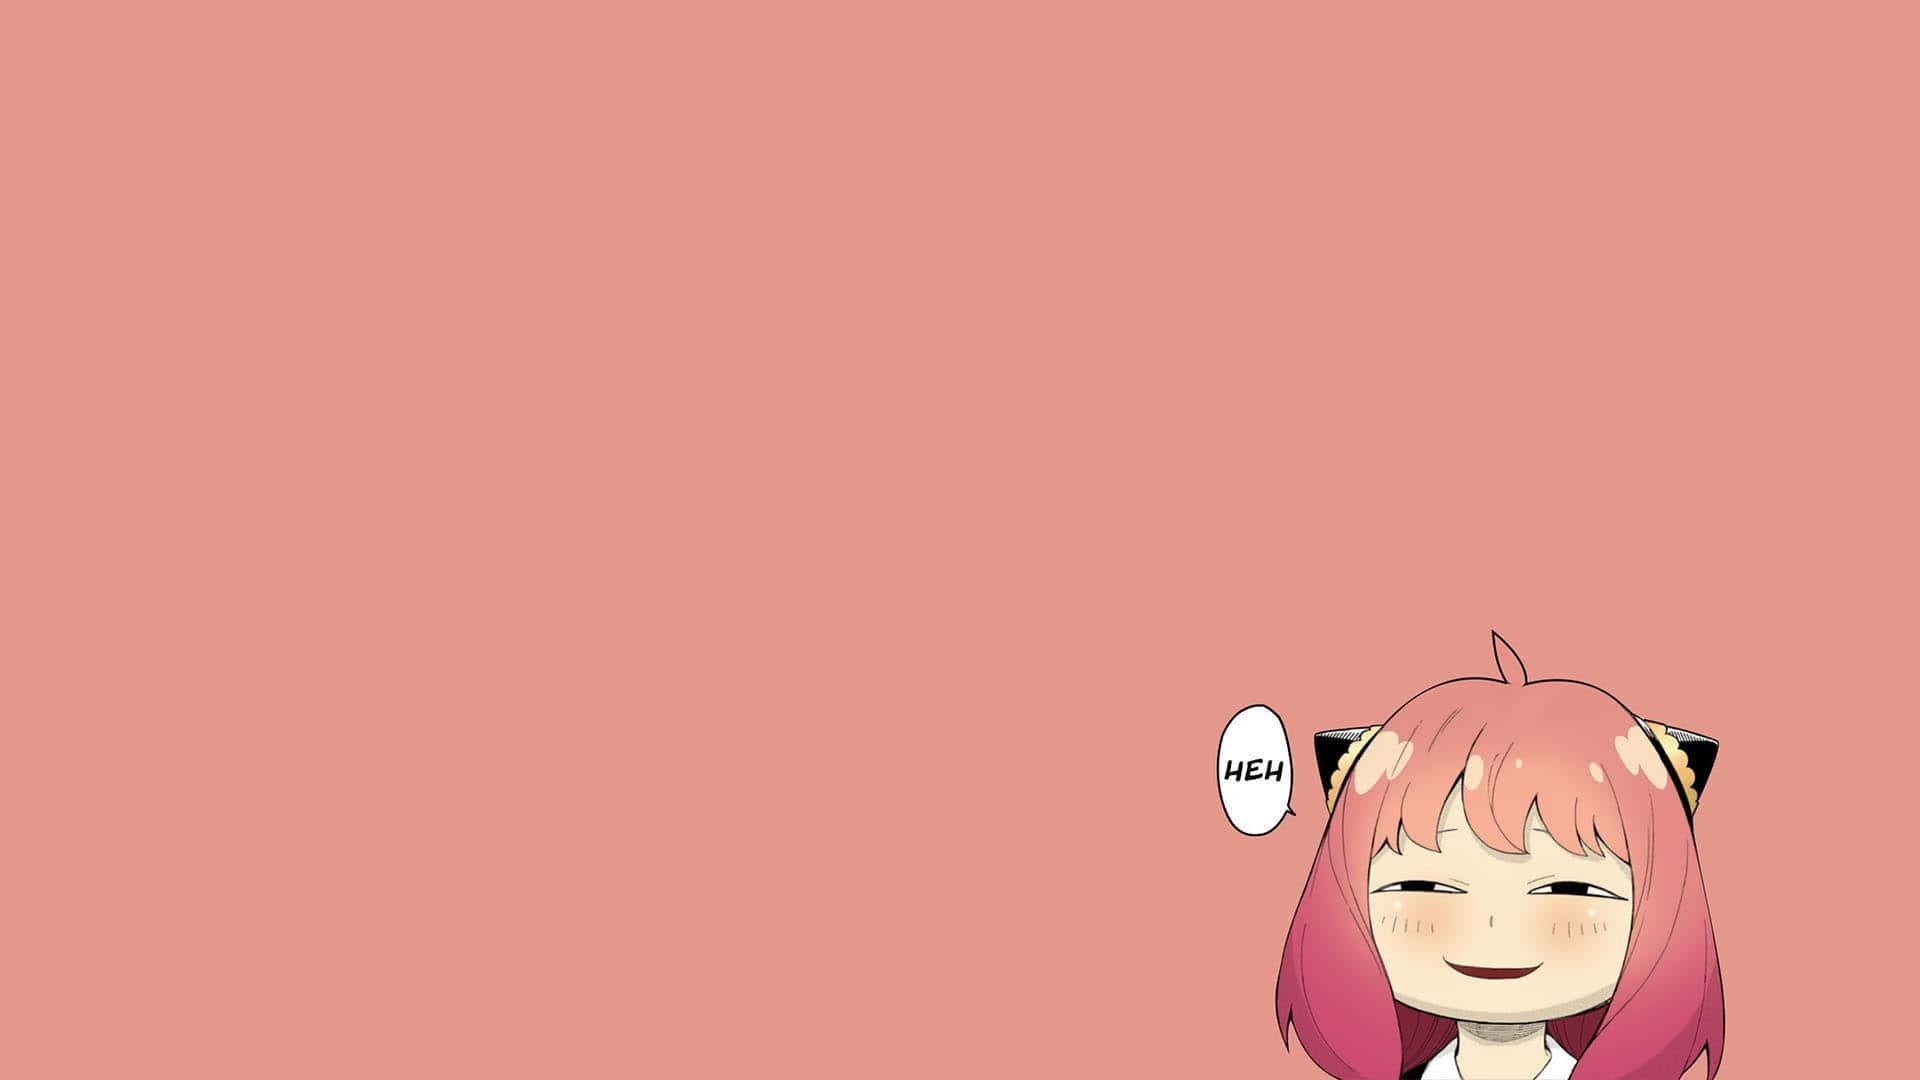 Smug Face Of The Little Anime Character Wallpaper